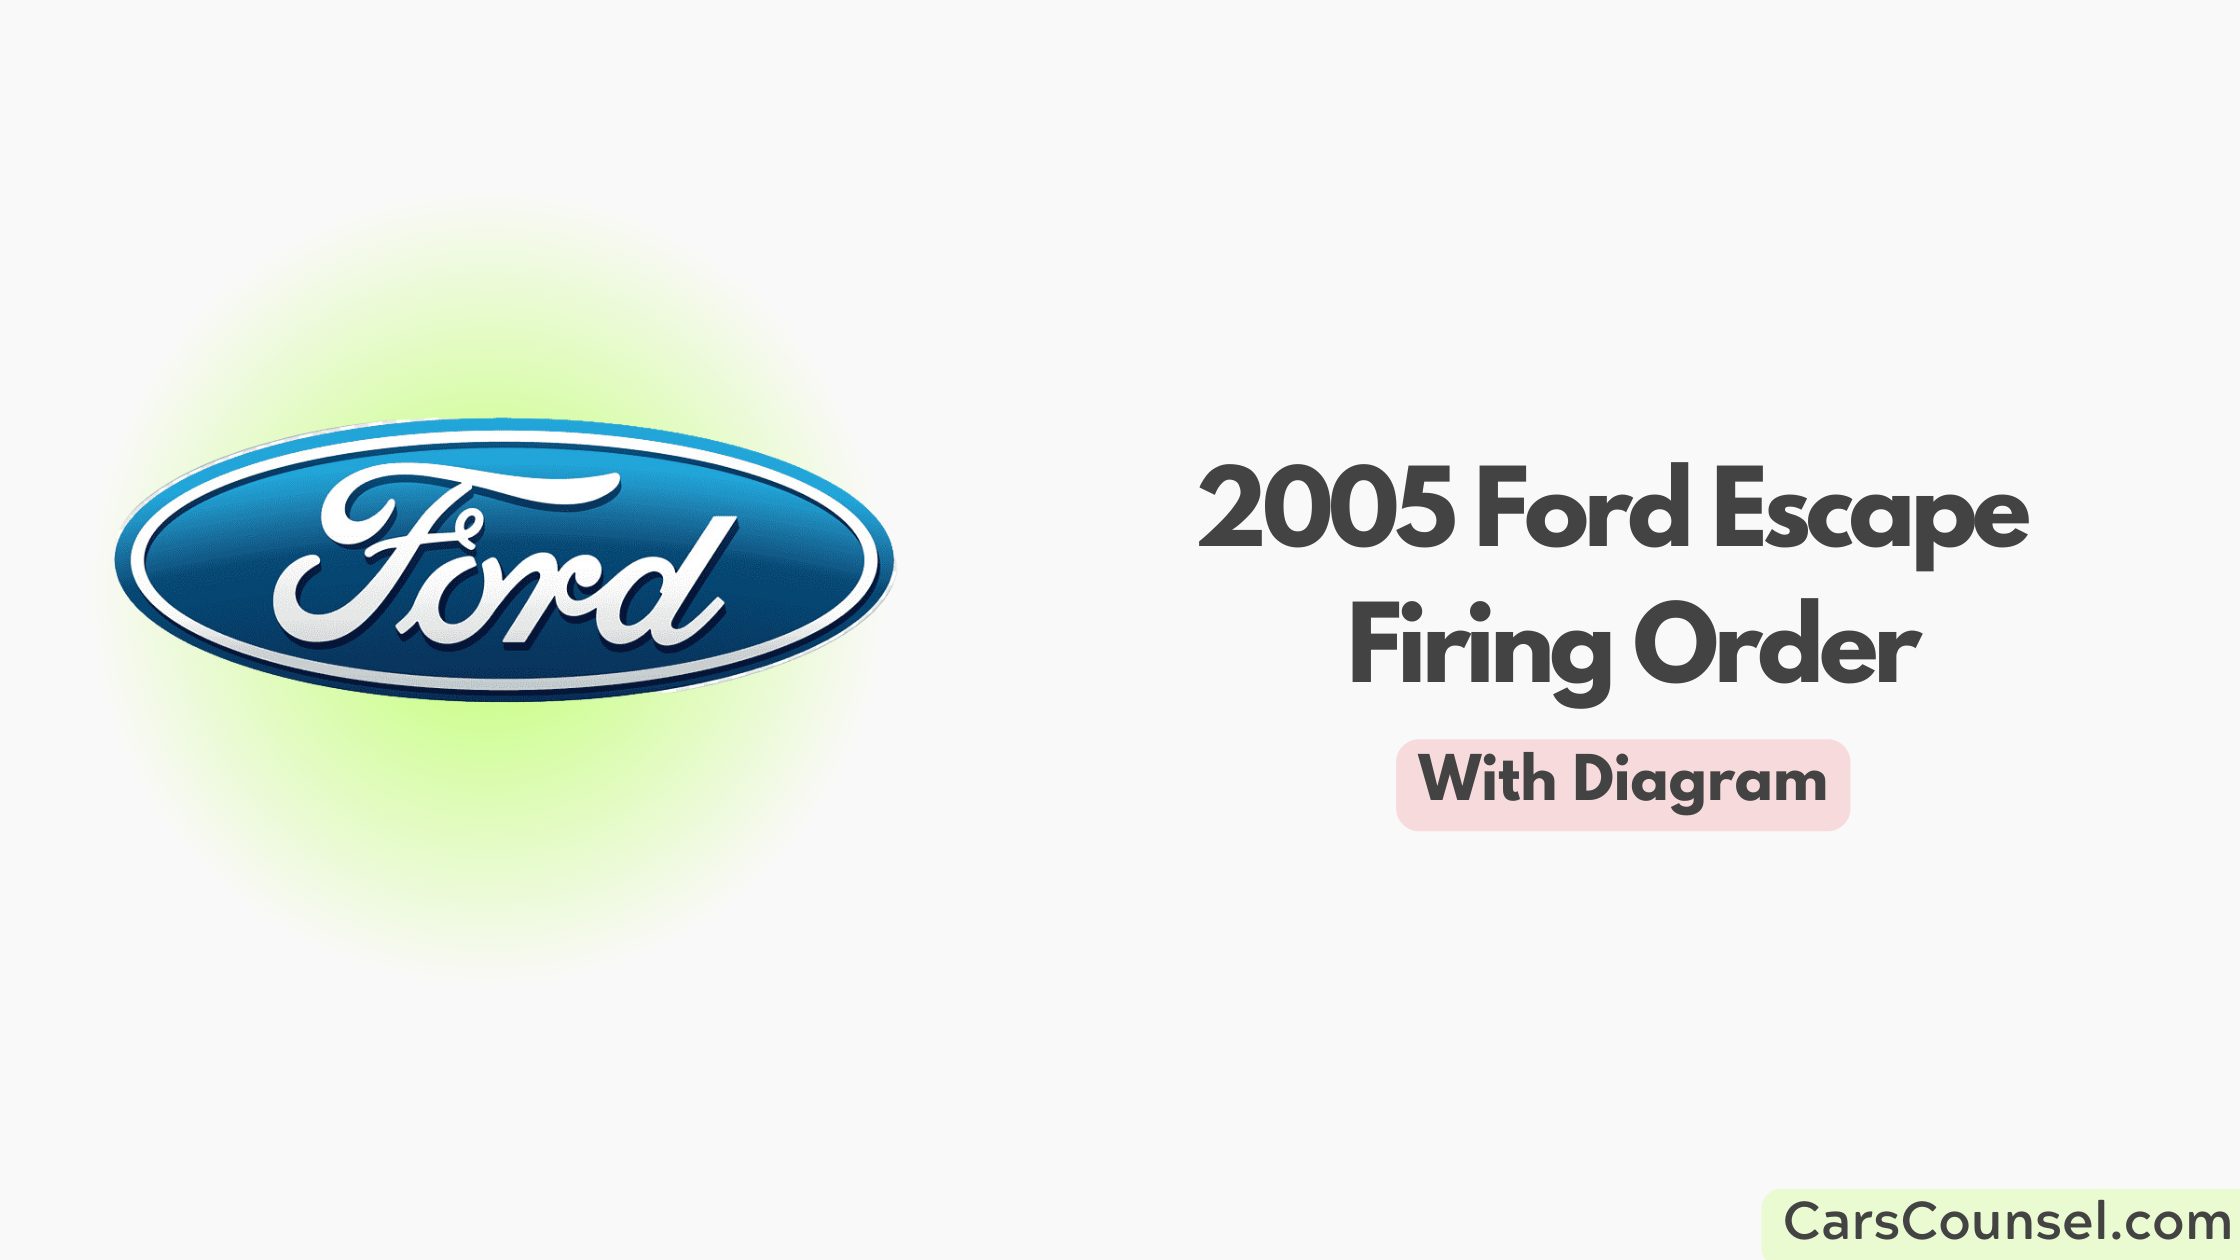 2005 Ford Escape Firing Order With Diagram